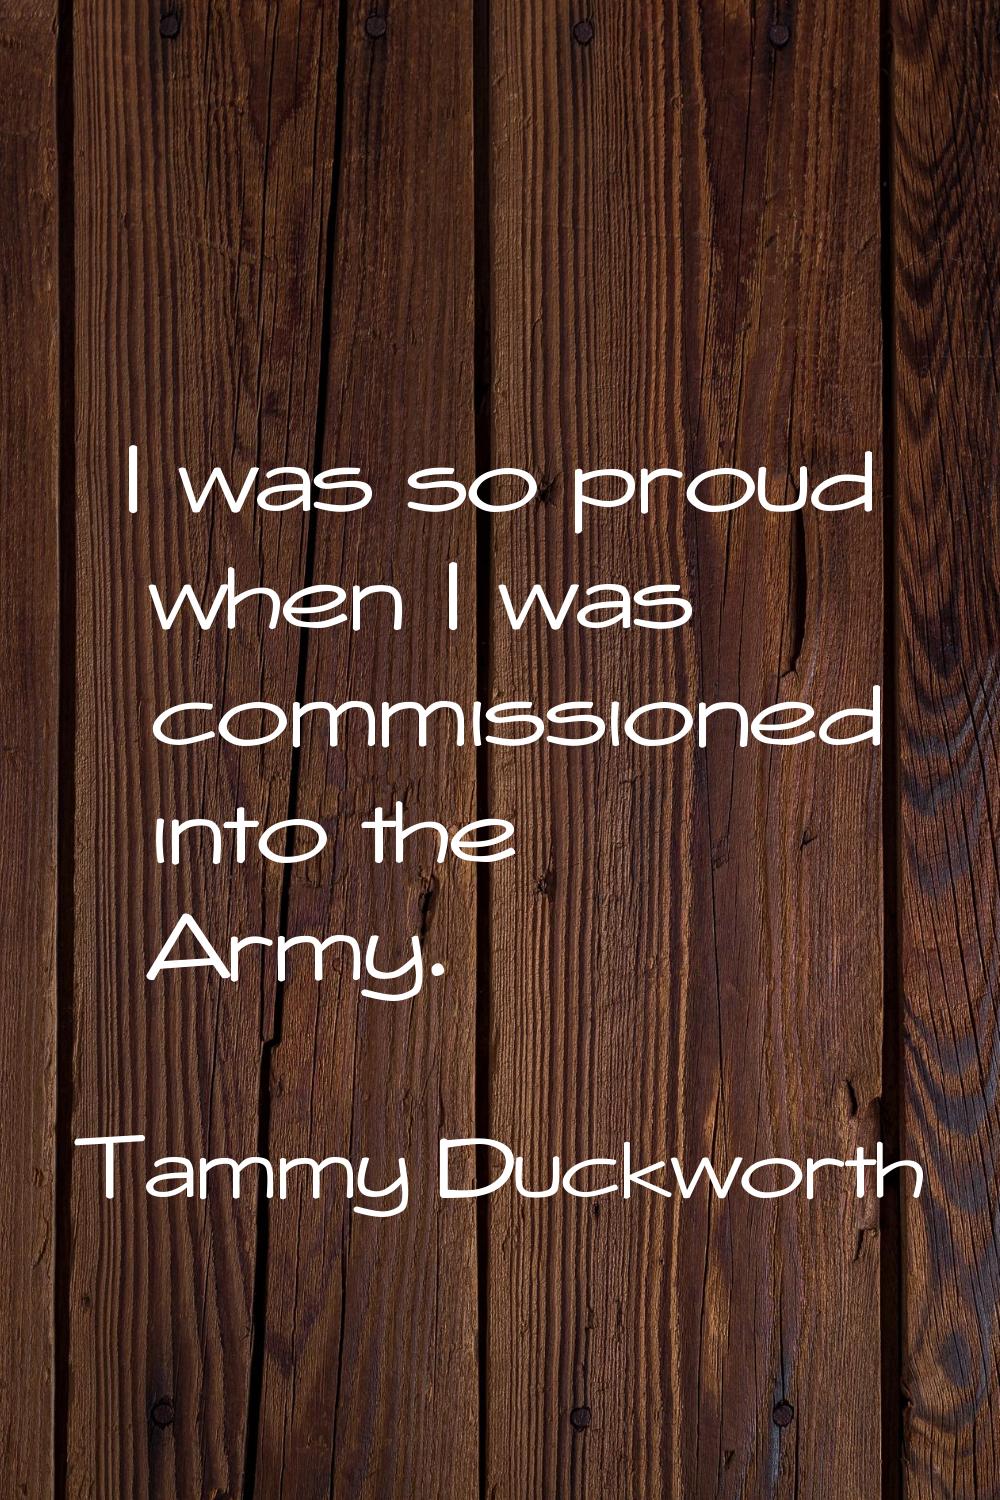 I was so proud when I was commissioned into the Army.